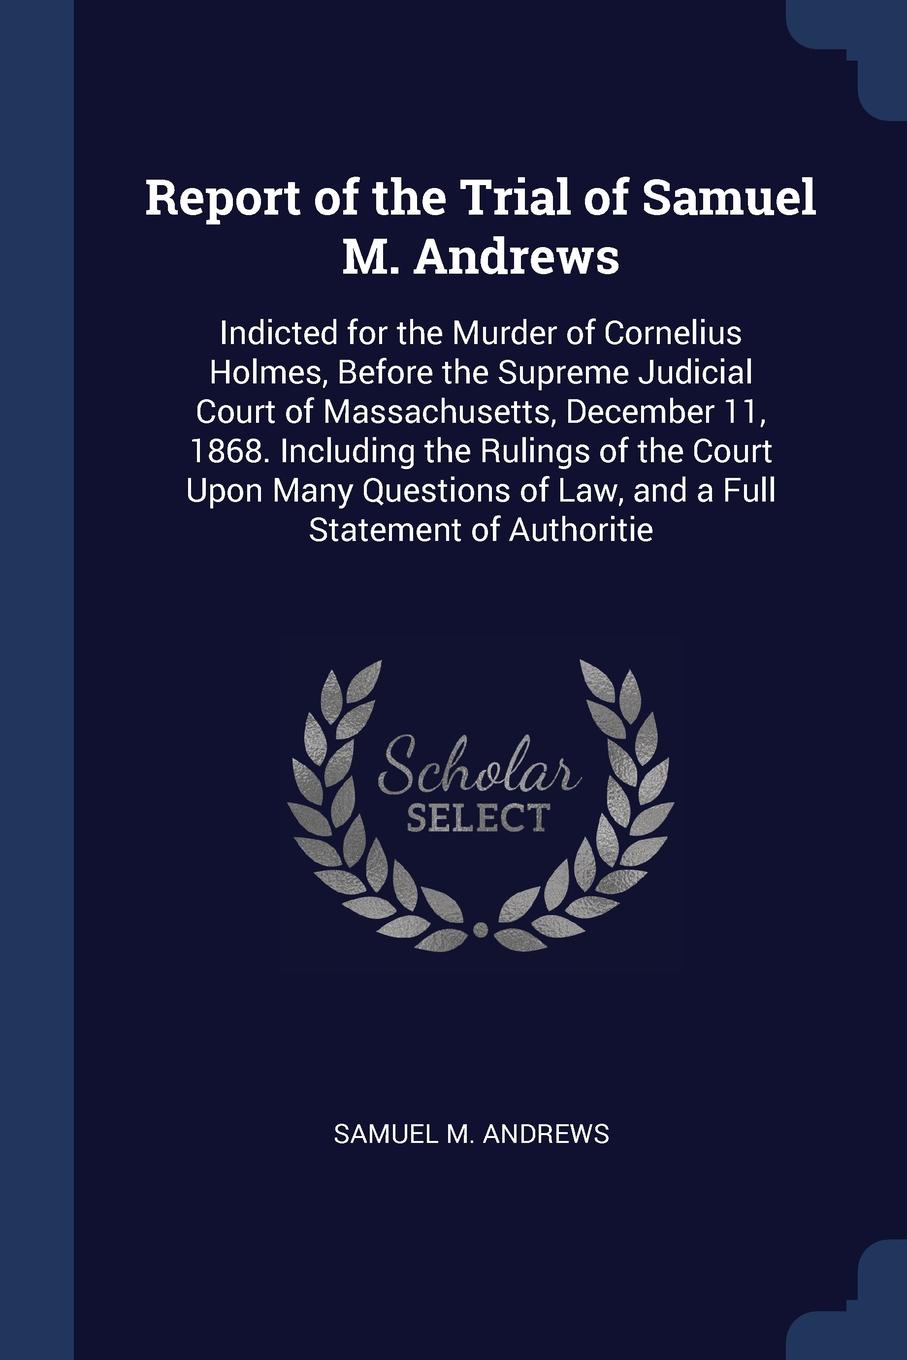 Report of the Trial of Samuel M. Andrews. Indicted for the Murder of Cornelius Holmes, Before the Supreme Judicial Court of Massachusetts, December 11, 1868. Including the Rulings of the Court Upon Many Questions of Law, and a Full Statement of Au...